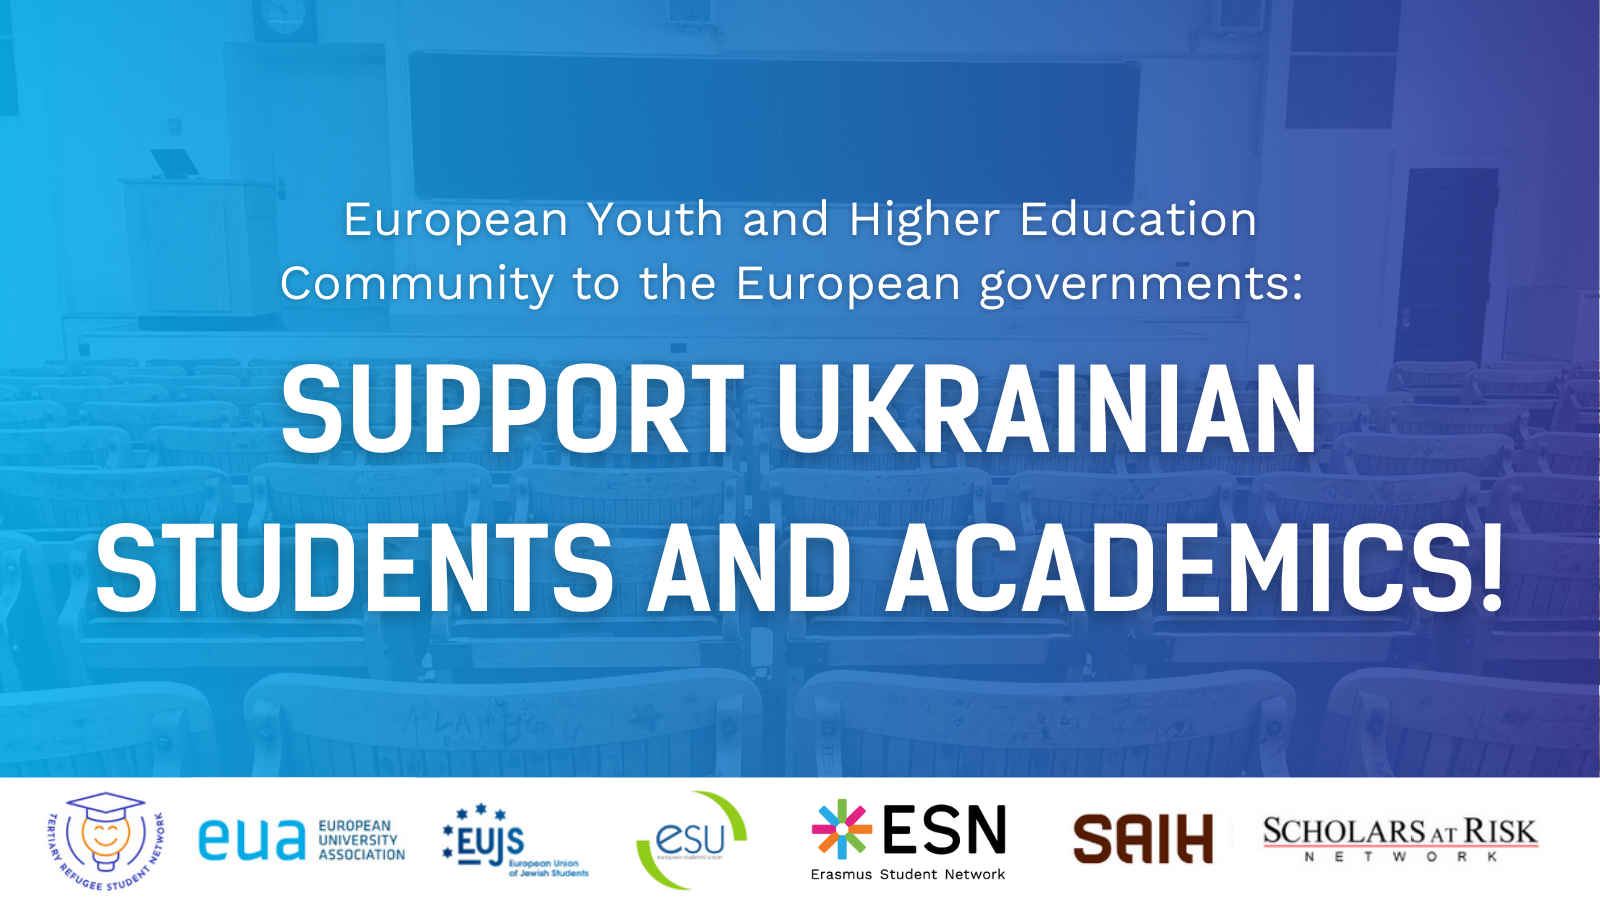 The European Youth and Higher Education Community to the European governments: support Ukrainian students and academics!